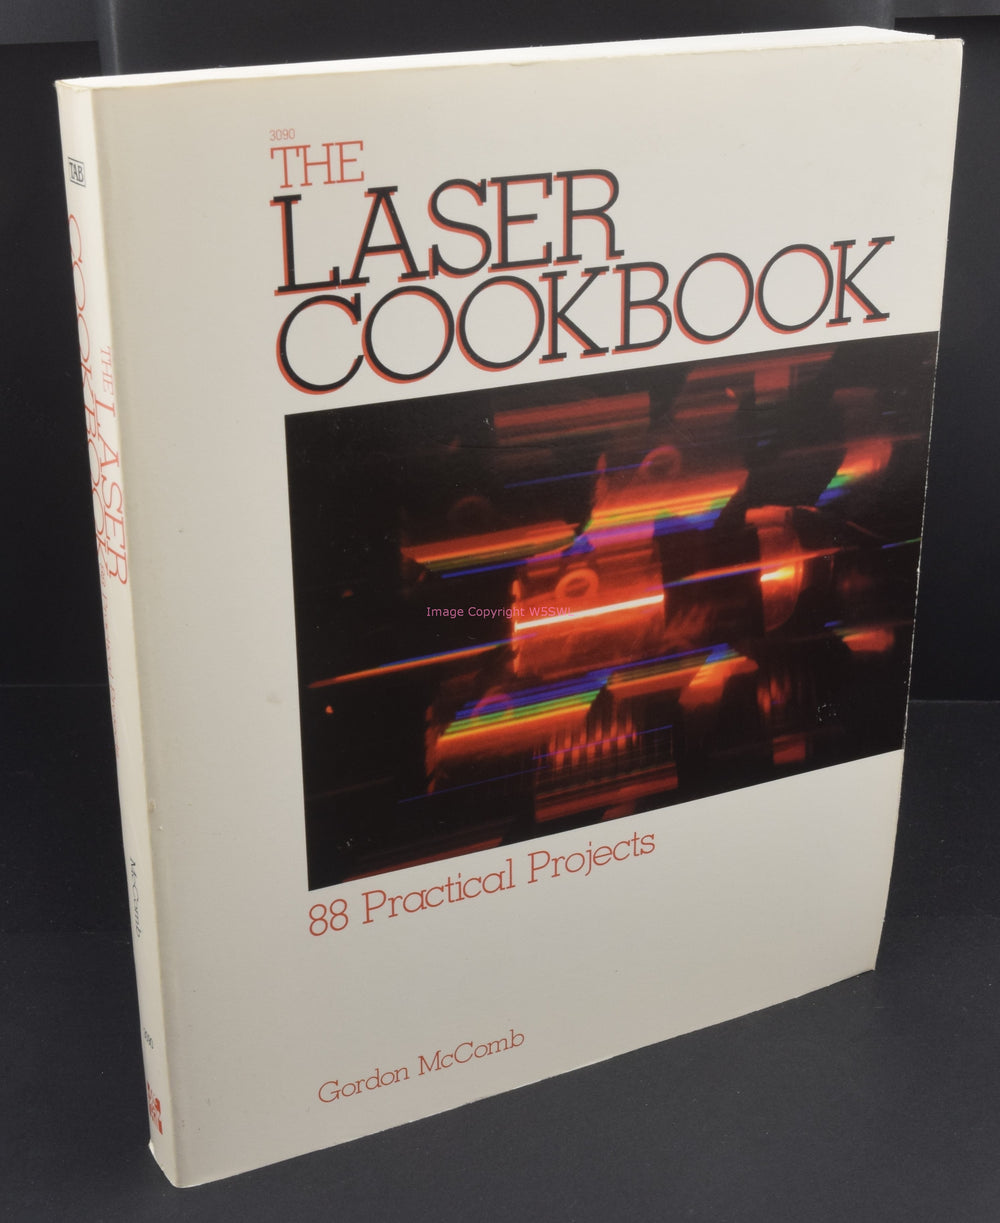 The Laser Cookbook - 88 Practical Projects Gordon McComb Tab Books - Dave's Hobby Shop by W5SWL